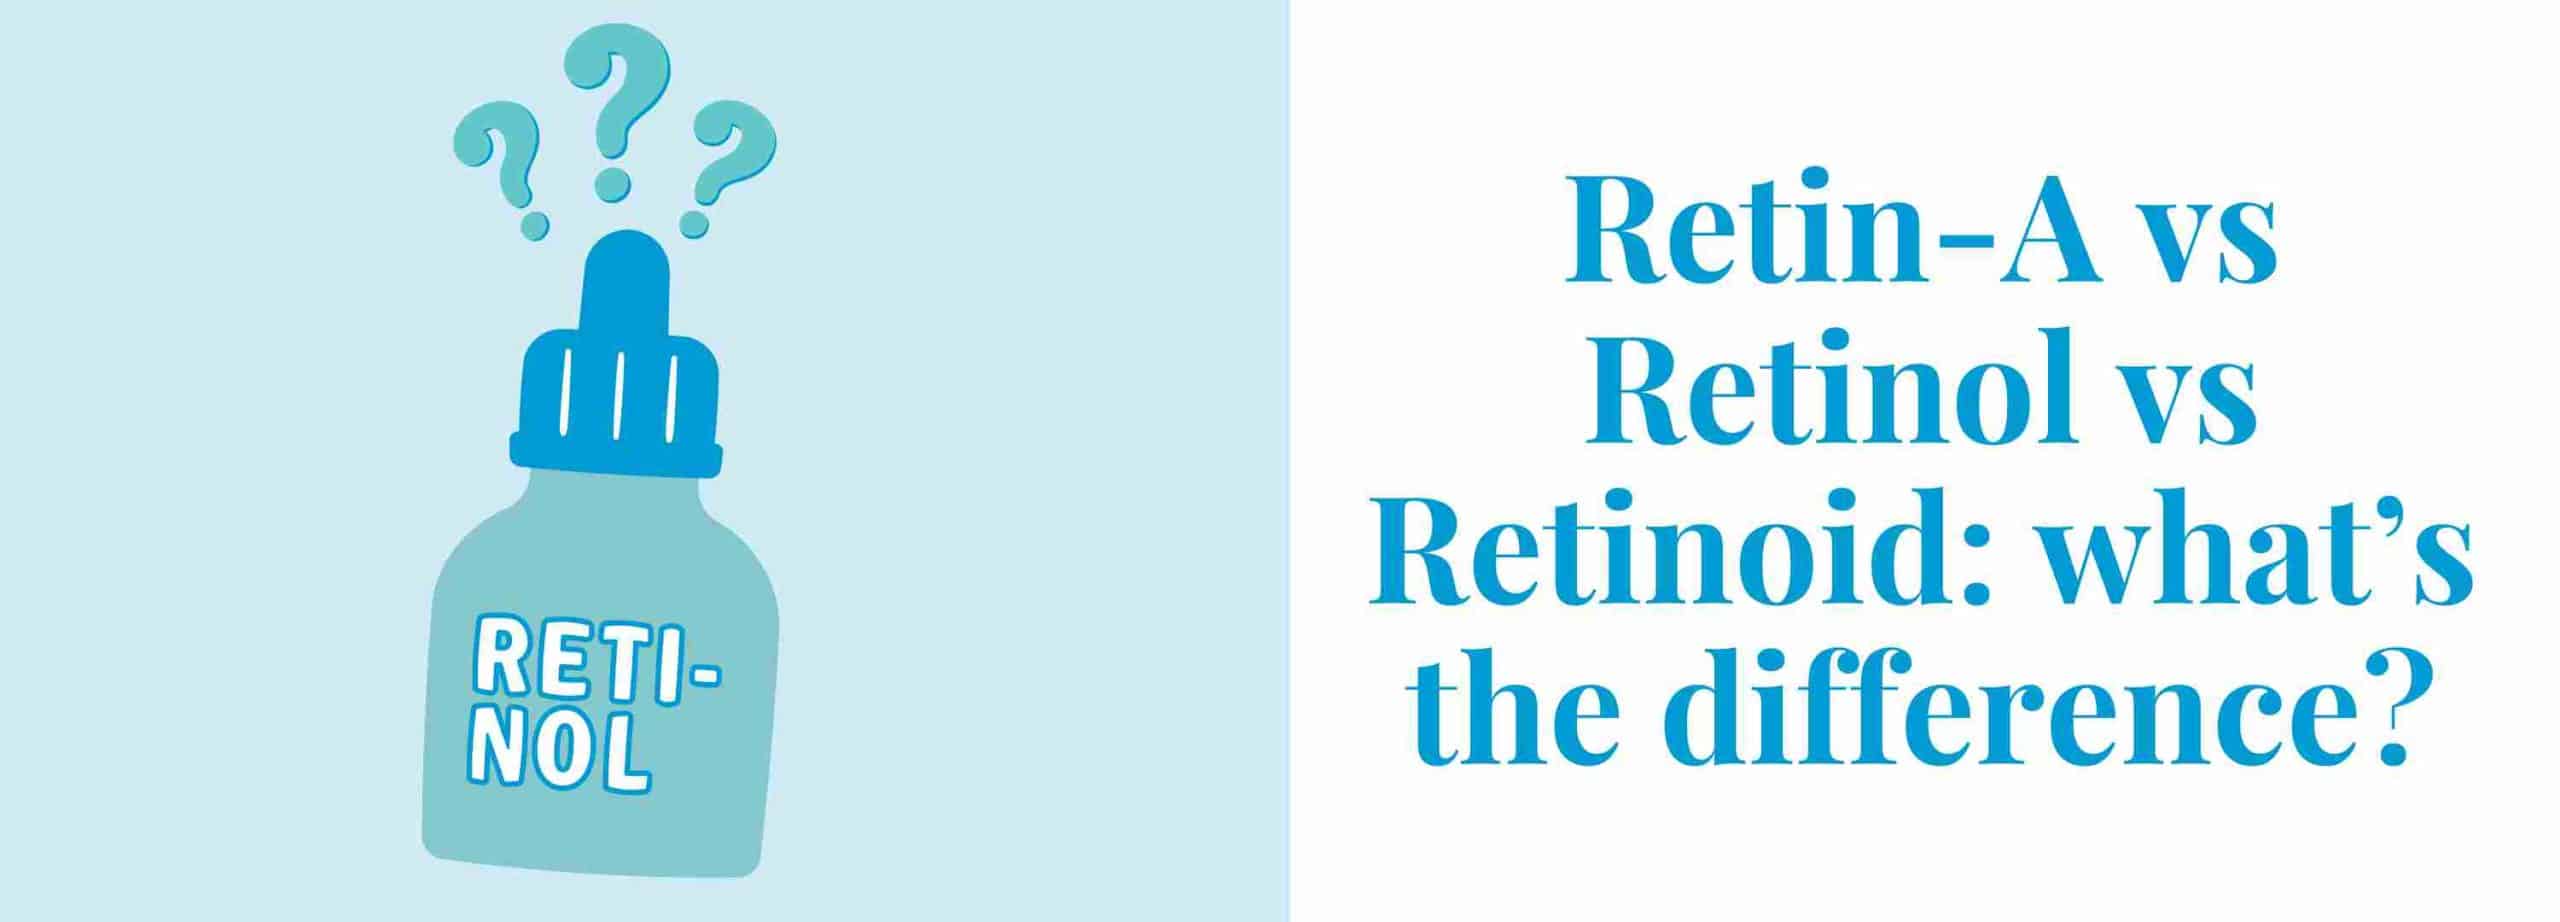 Retin-A vs Retinol: What’s the Difference?